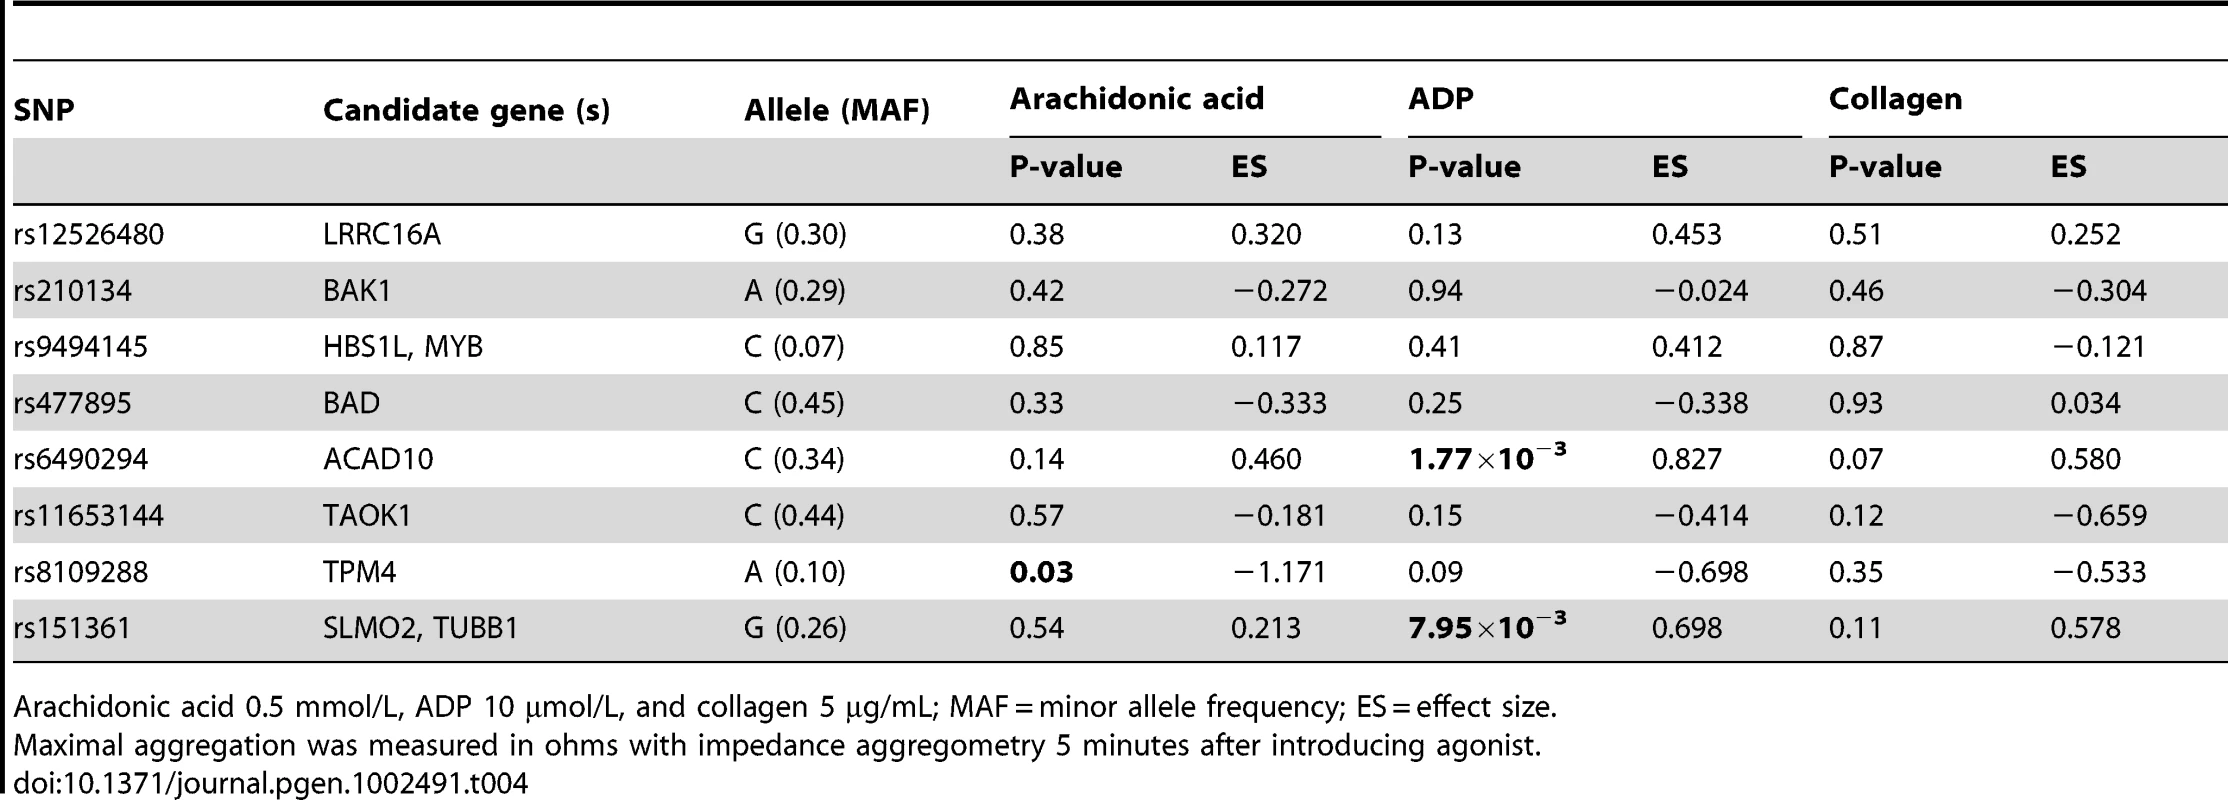 Association of the top SNP from each locus with agonist-induced platelet aggregation in whole blood.